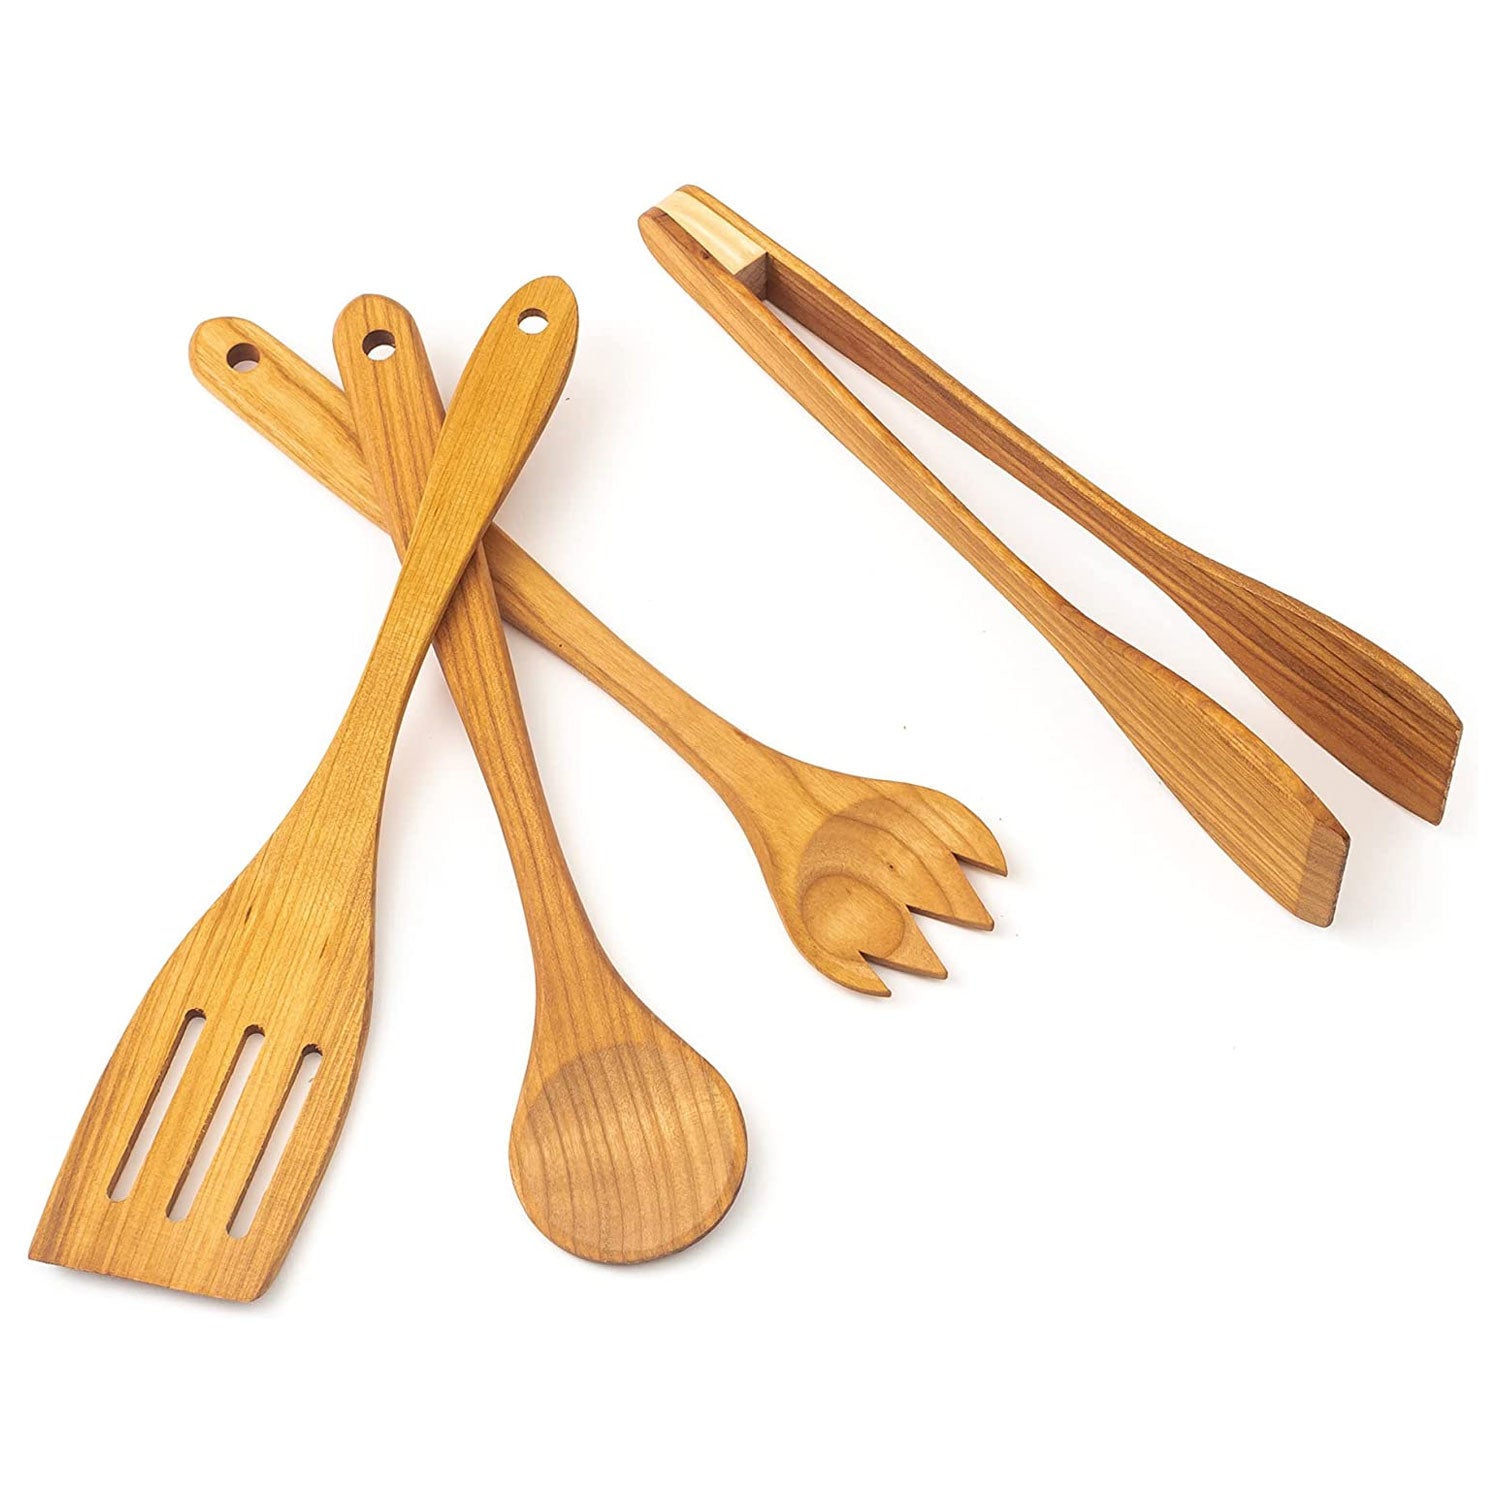 https://cdn.shopify.com/s/files/1/0515/2440/3381/products/4-piece-wooden-kitchen-cooking-set-cherry-wood-tuuli-877.jpg